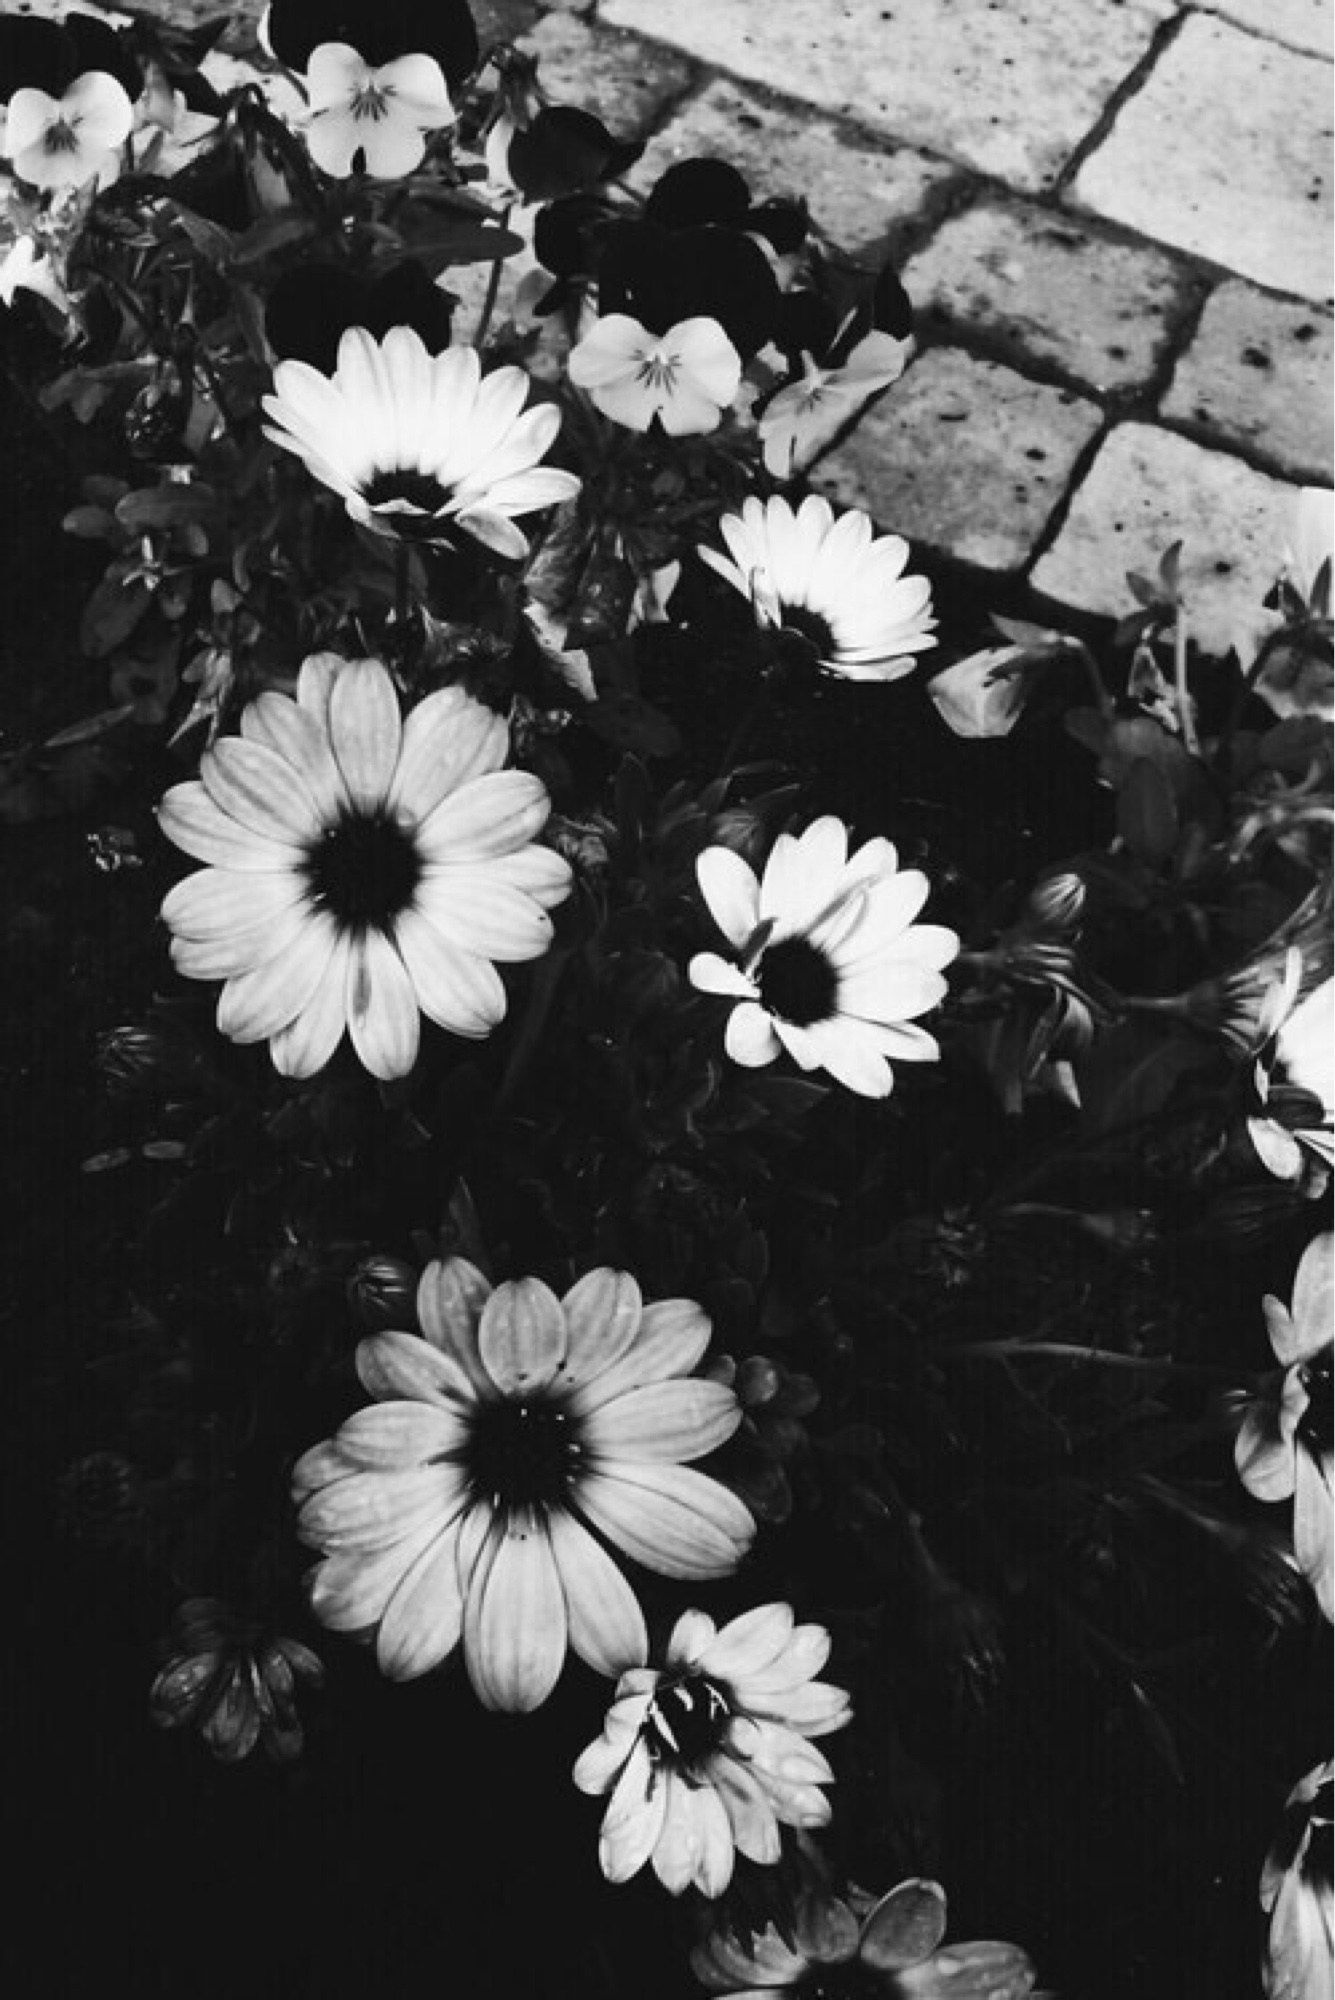 A black and white photo of some flowers - Black and white